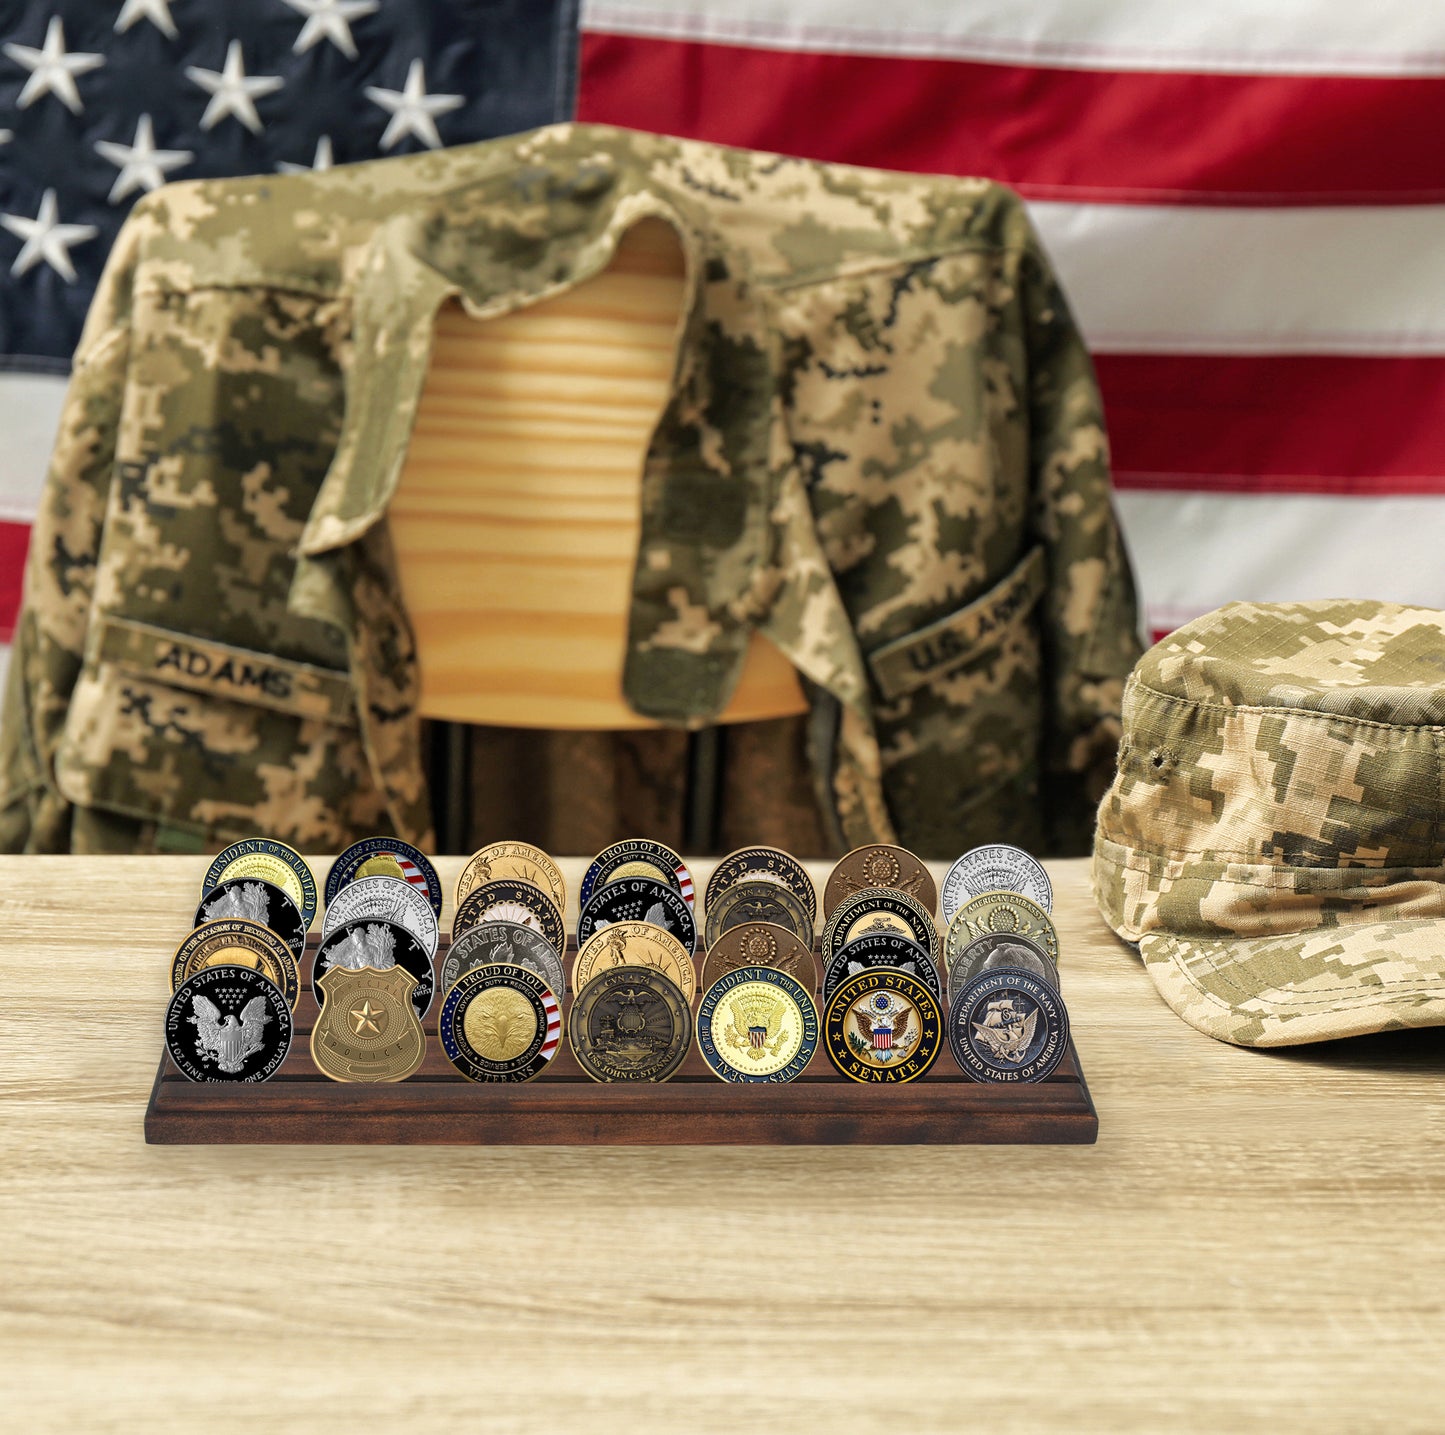 Americanflat Challenge Coin Display with 4 Rows - Military Coin Display Case - Collectible Coin Holder, 12” x 4” Solid Wood